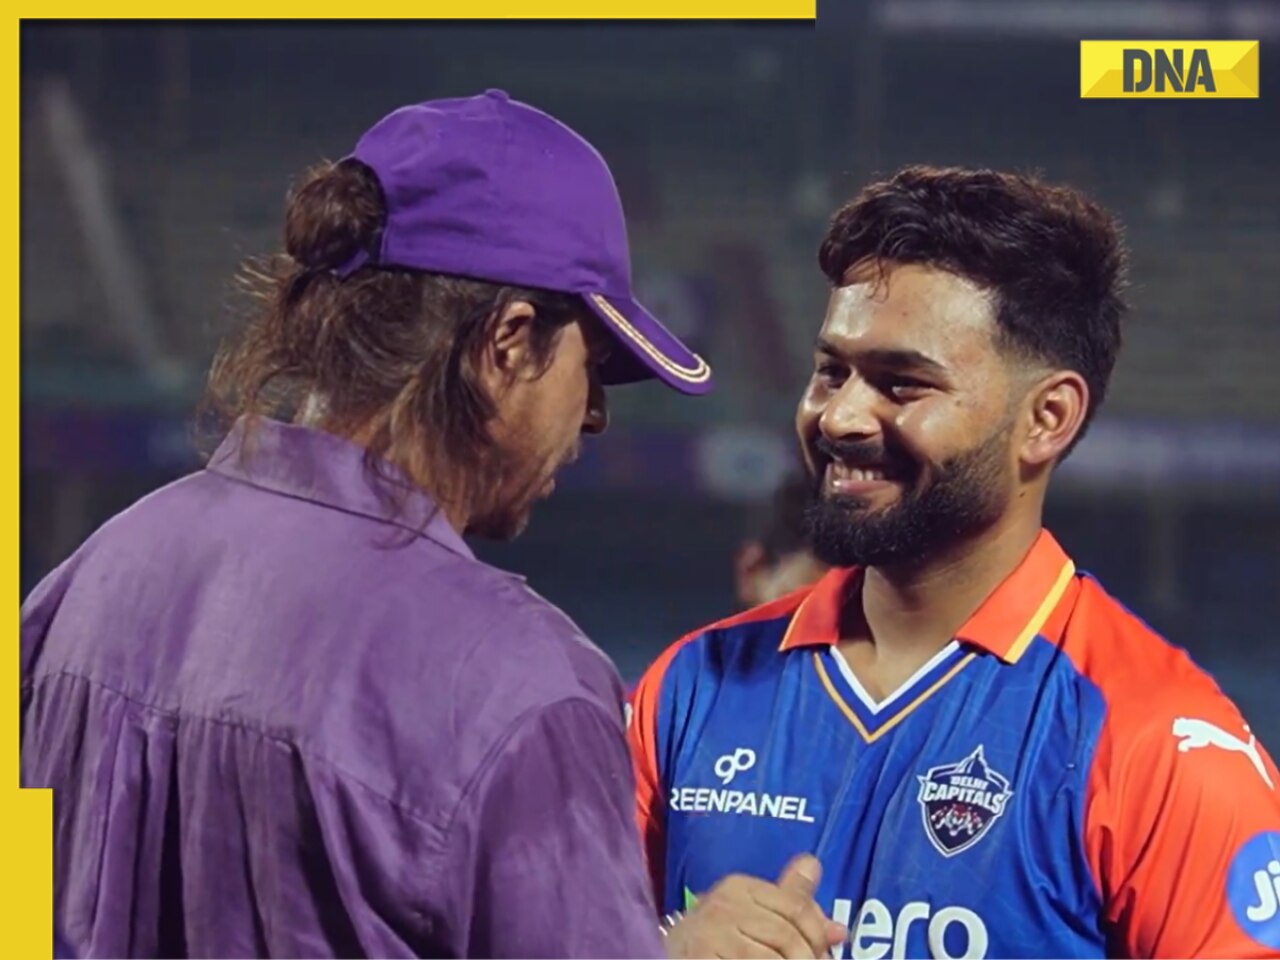 Watch: Shah Rukh Khan's heartwarming gesture for Rishabh Pant at KKR vs DC IPL match has fans calling him 'pure hearted'